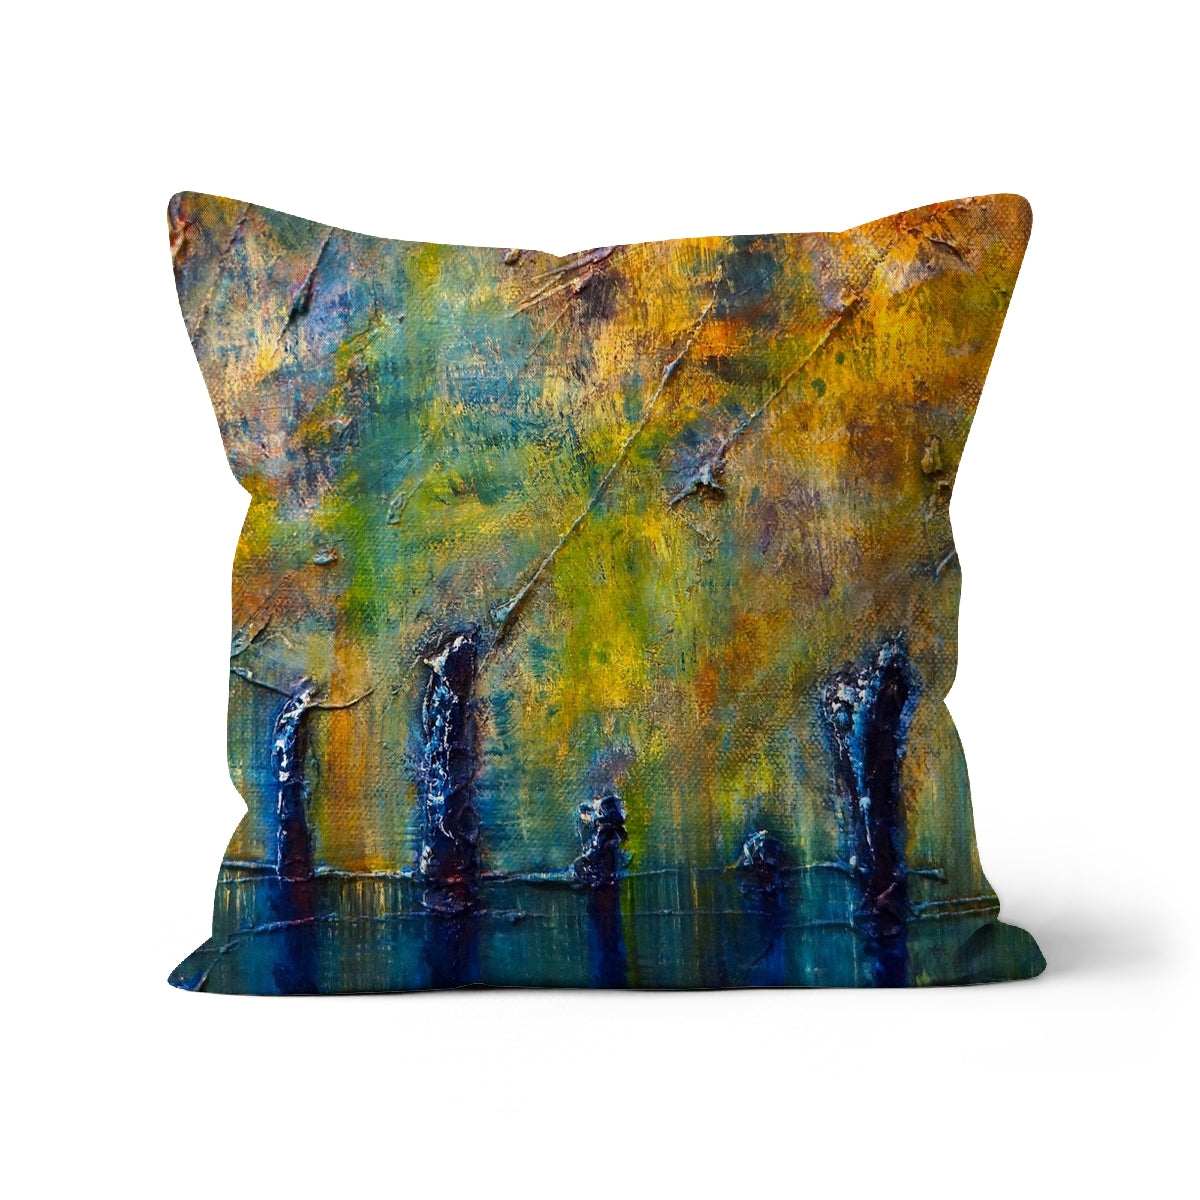 Stenness Moonlight Orkney Art Gifts Cushion-Cushions-Orkney Art Gallery-Linen-18"x18"-Paintings, Prints, Homeware, Art Gifts From Scotland By Scottish Artist Kevin Hunter